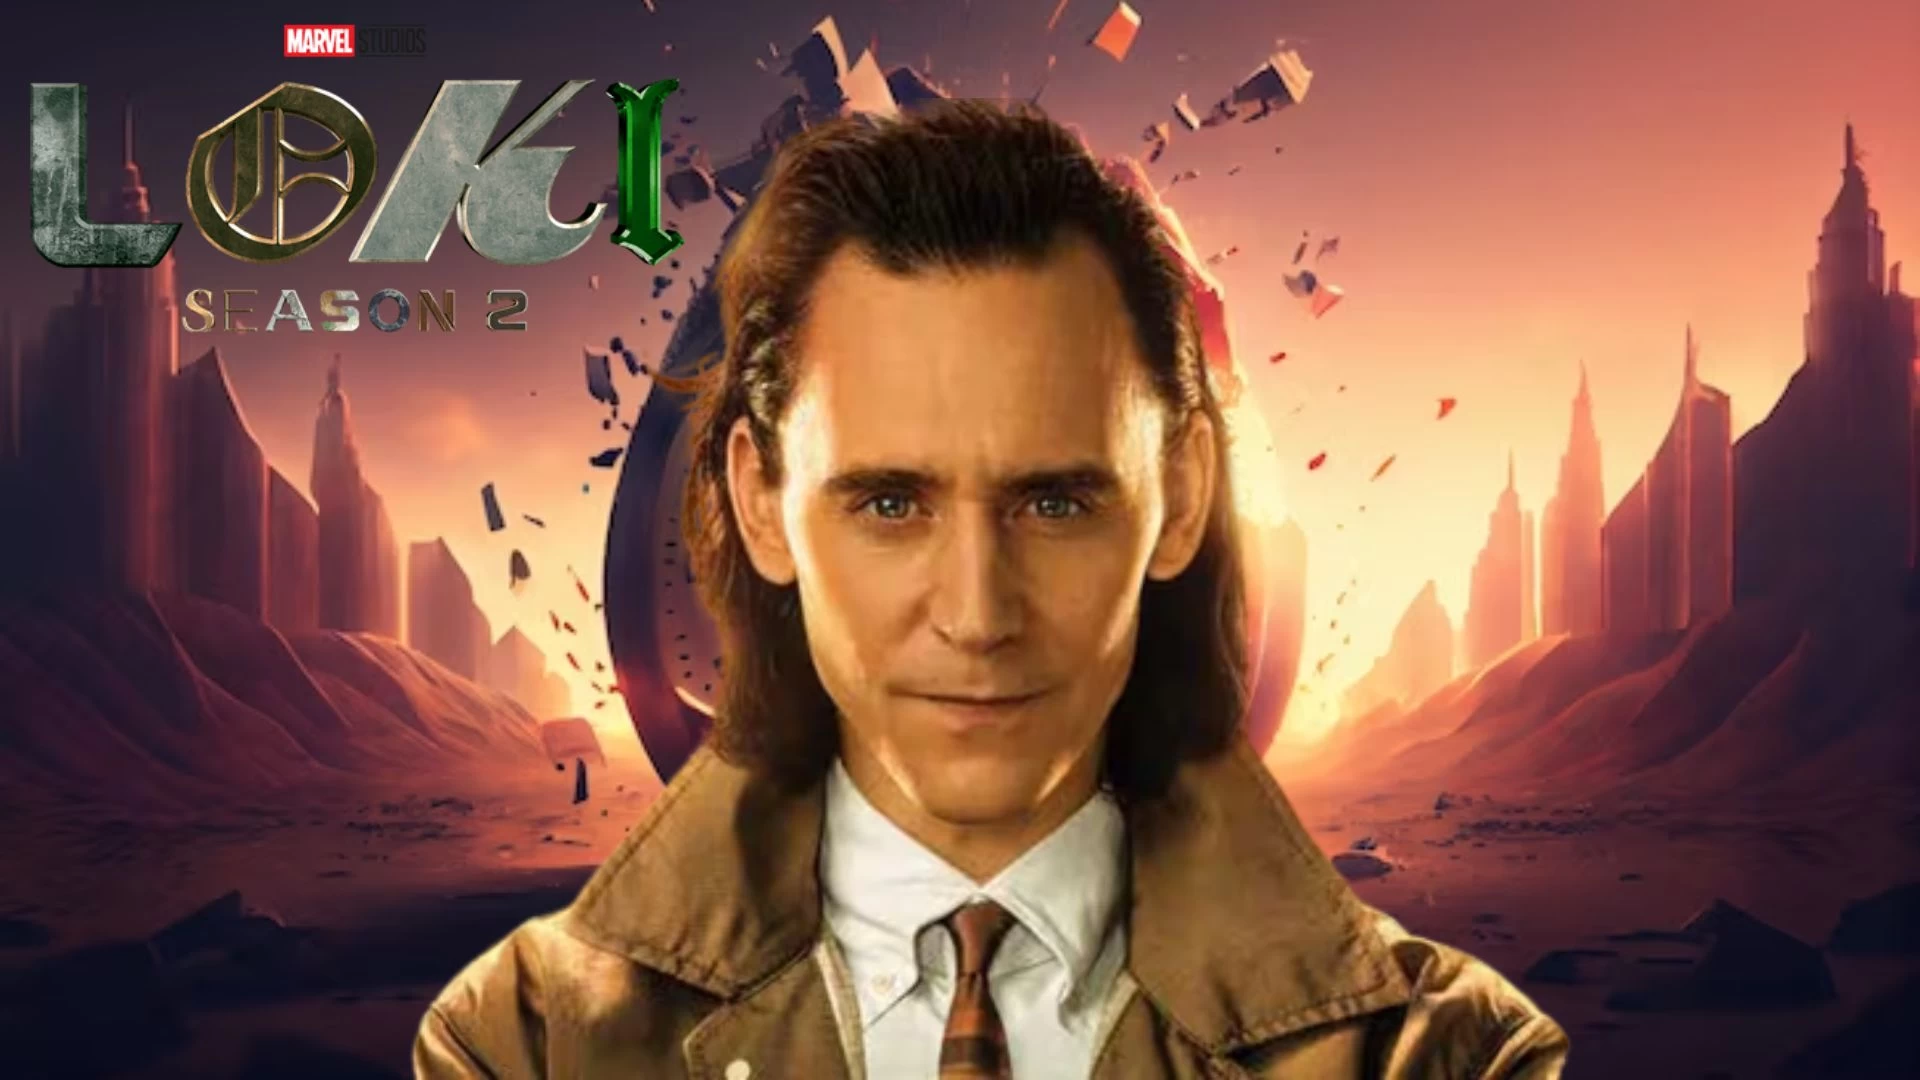 Loki Season 2 Episode 2 Ending Explained, Release Date, Cast, Plot, Summary, Review, Where to Watch and More